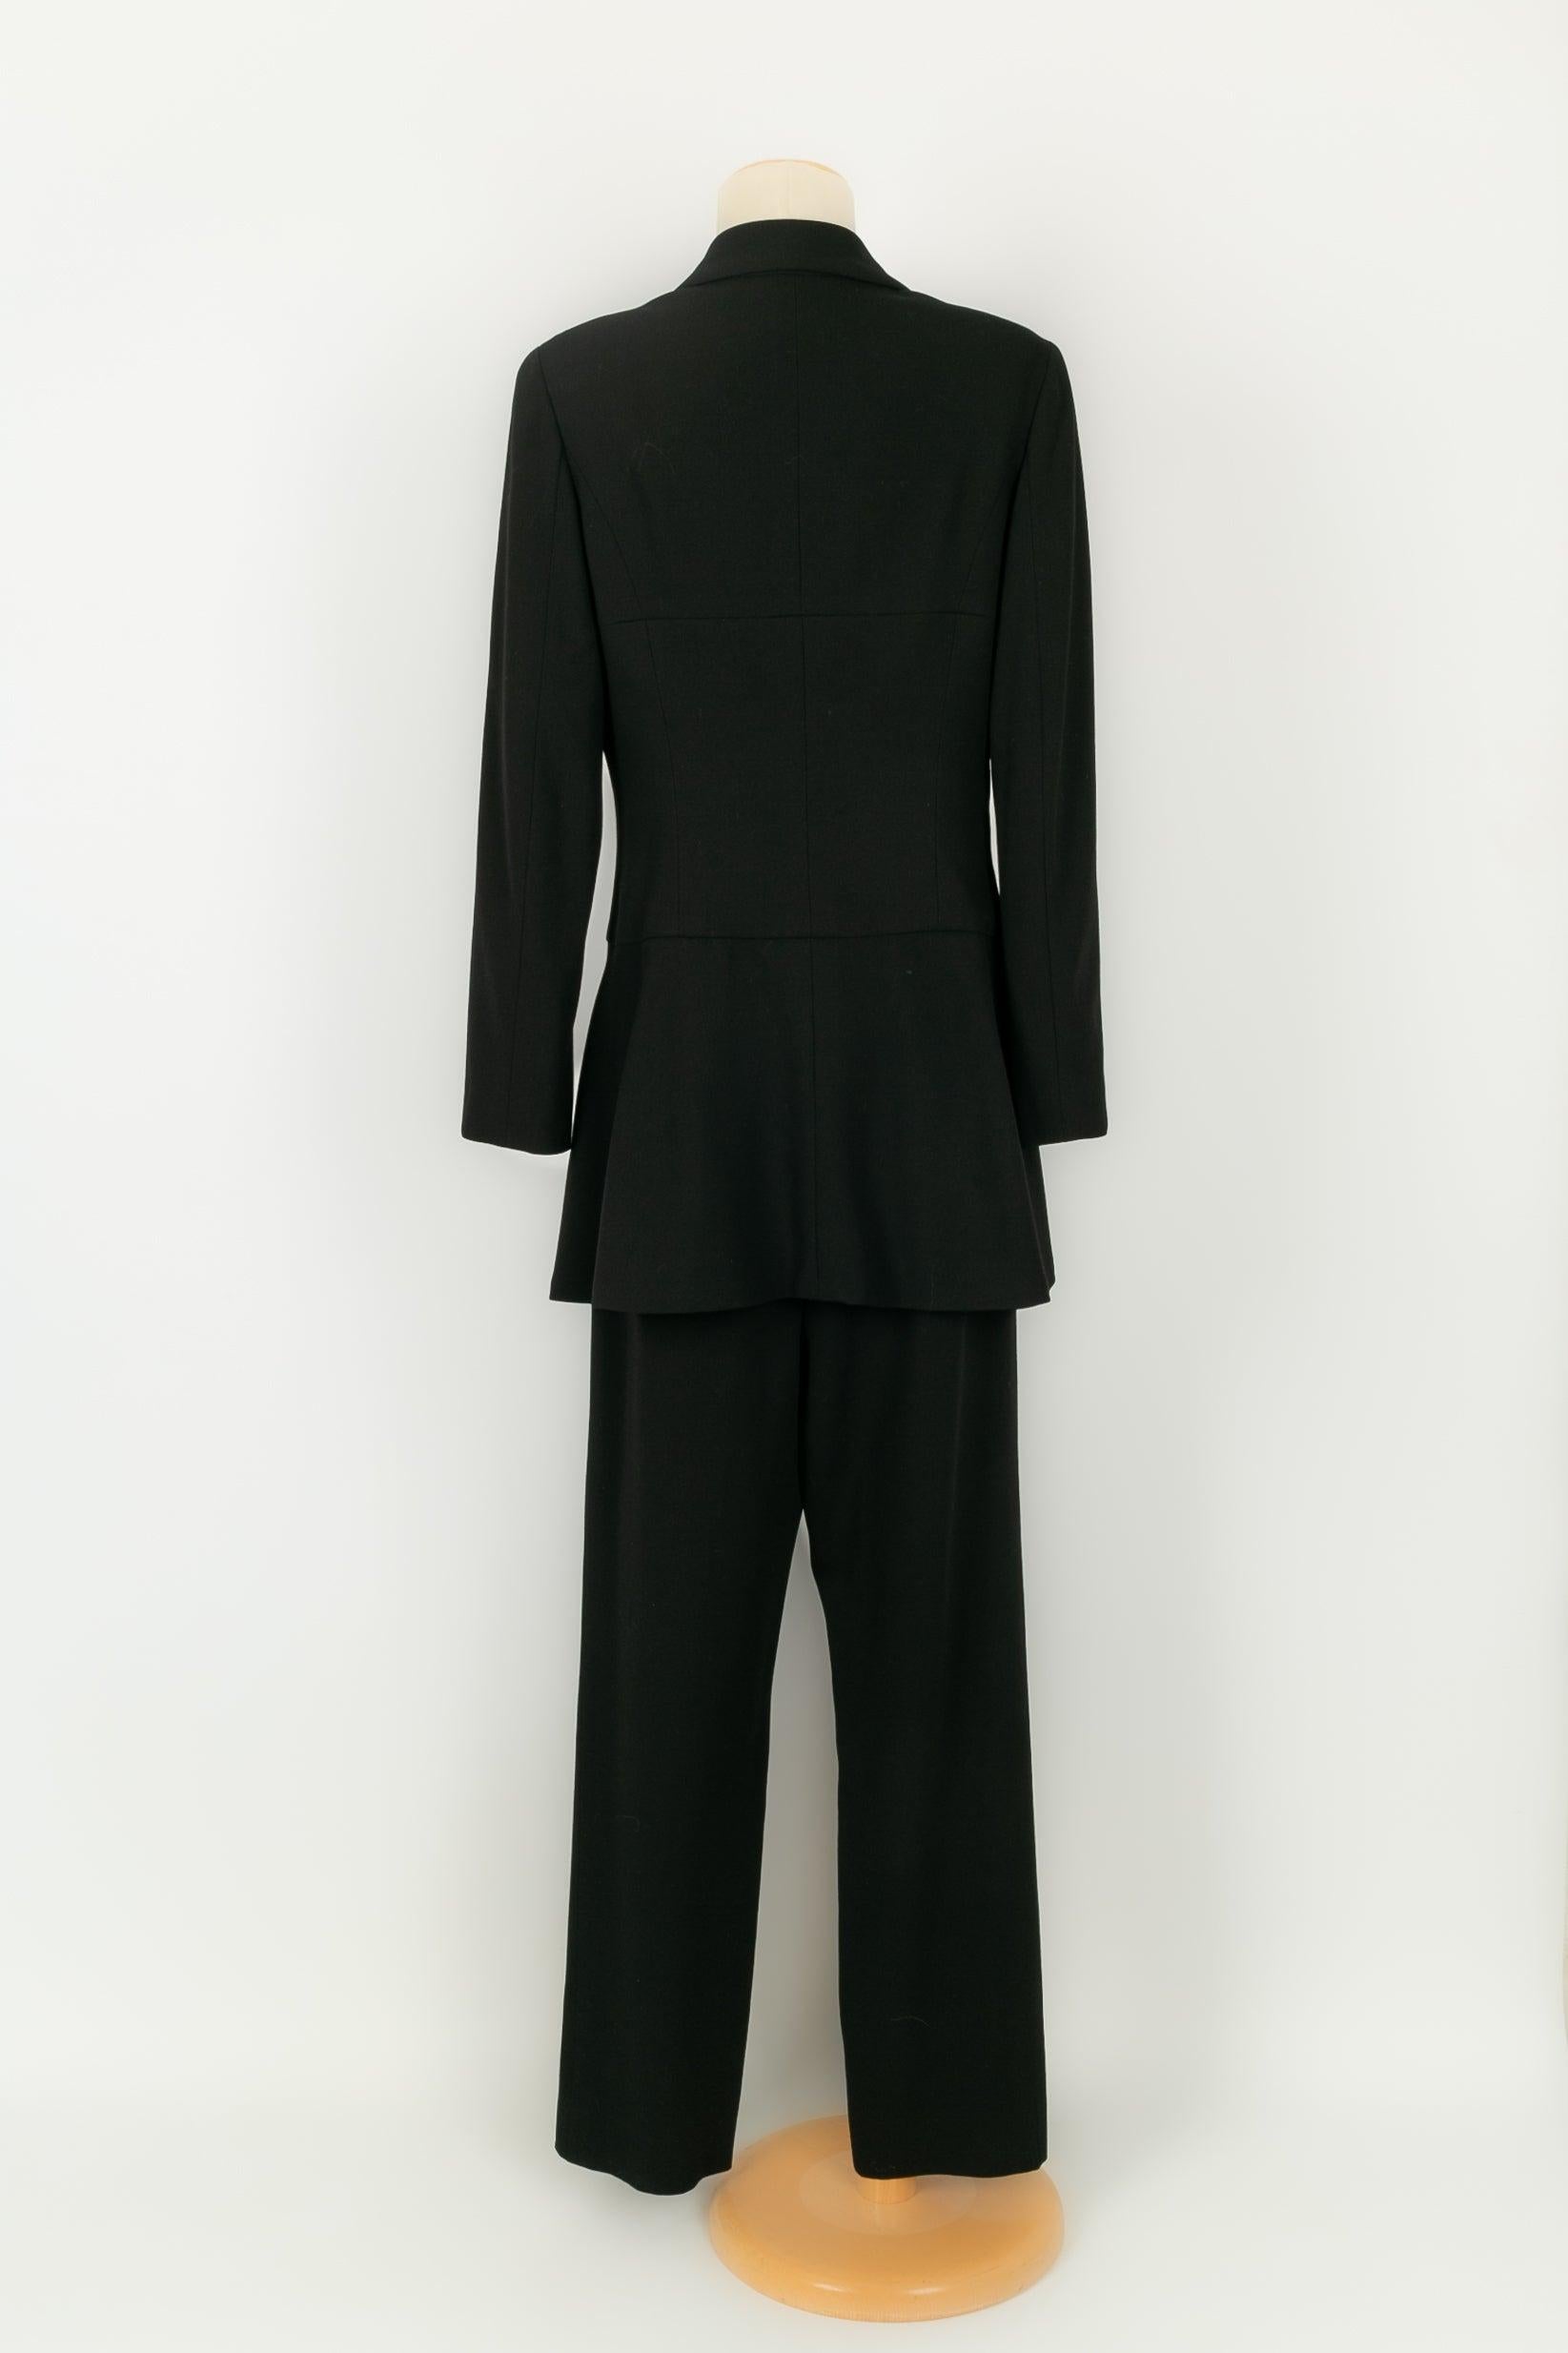 Chanel - (Made in France) Suit set composed of a jacket and pants in black wool. Fall-Winter 1997 Collection. Size 42FR.

Additional information:
Condition: Very good condition
Dimensions: Shoulder width: 45 cm - Sleeve length: 62 cm - Length: 86 cm